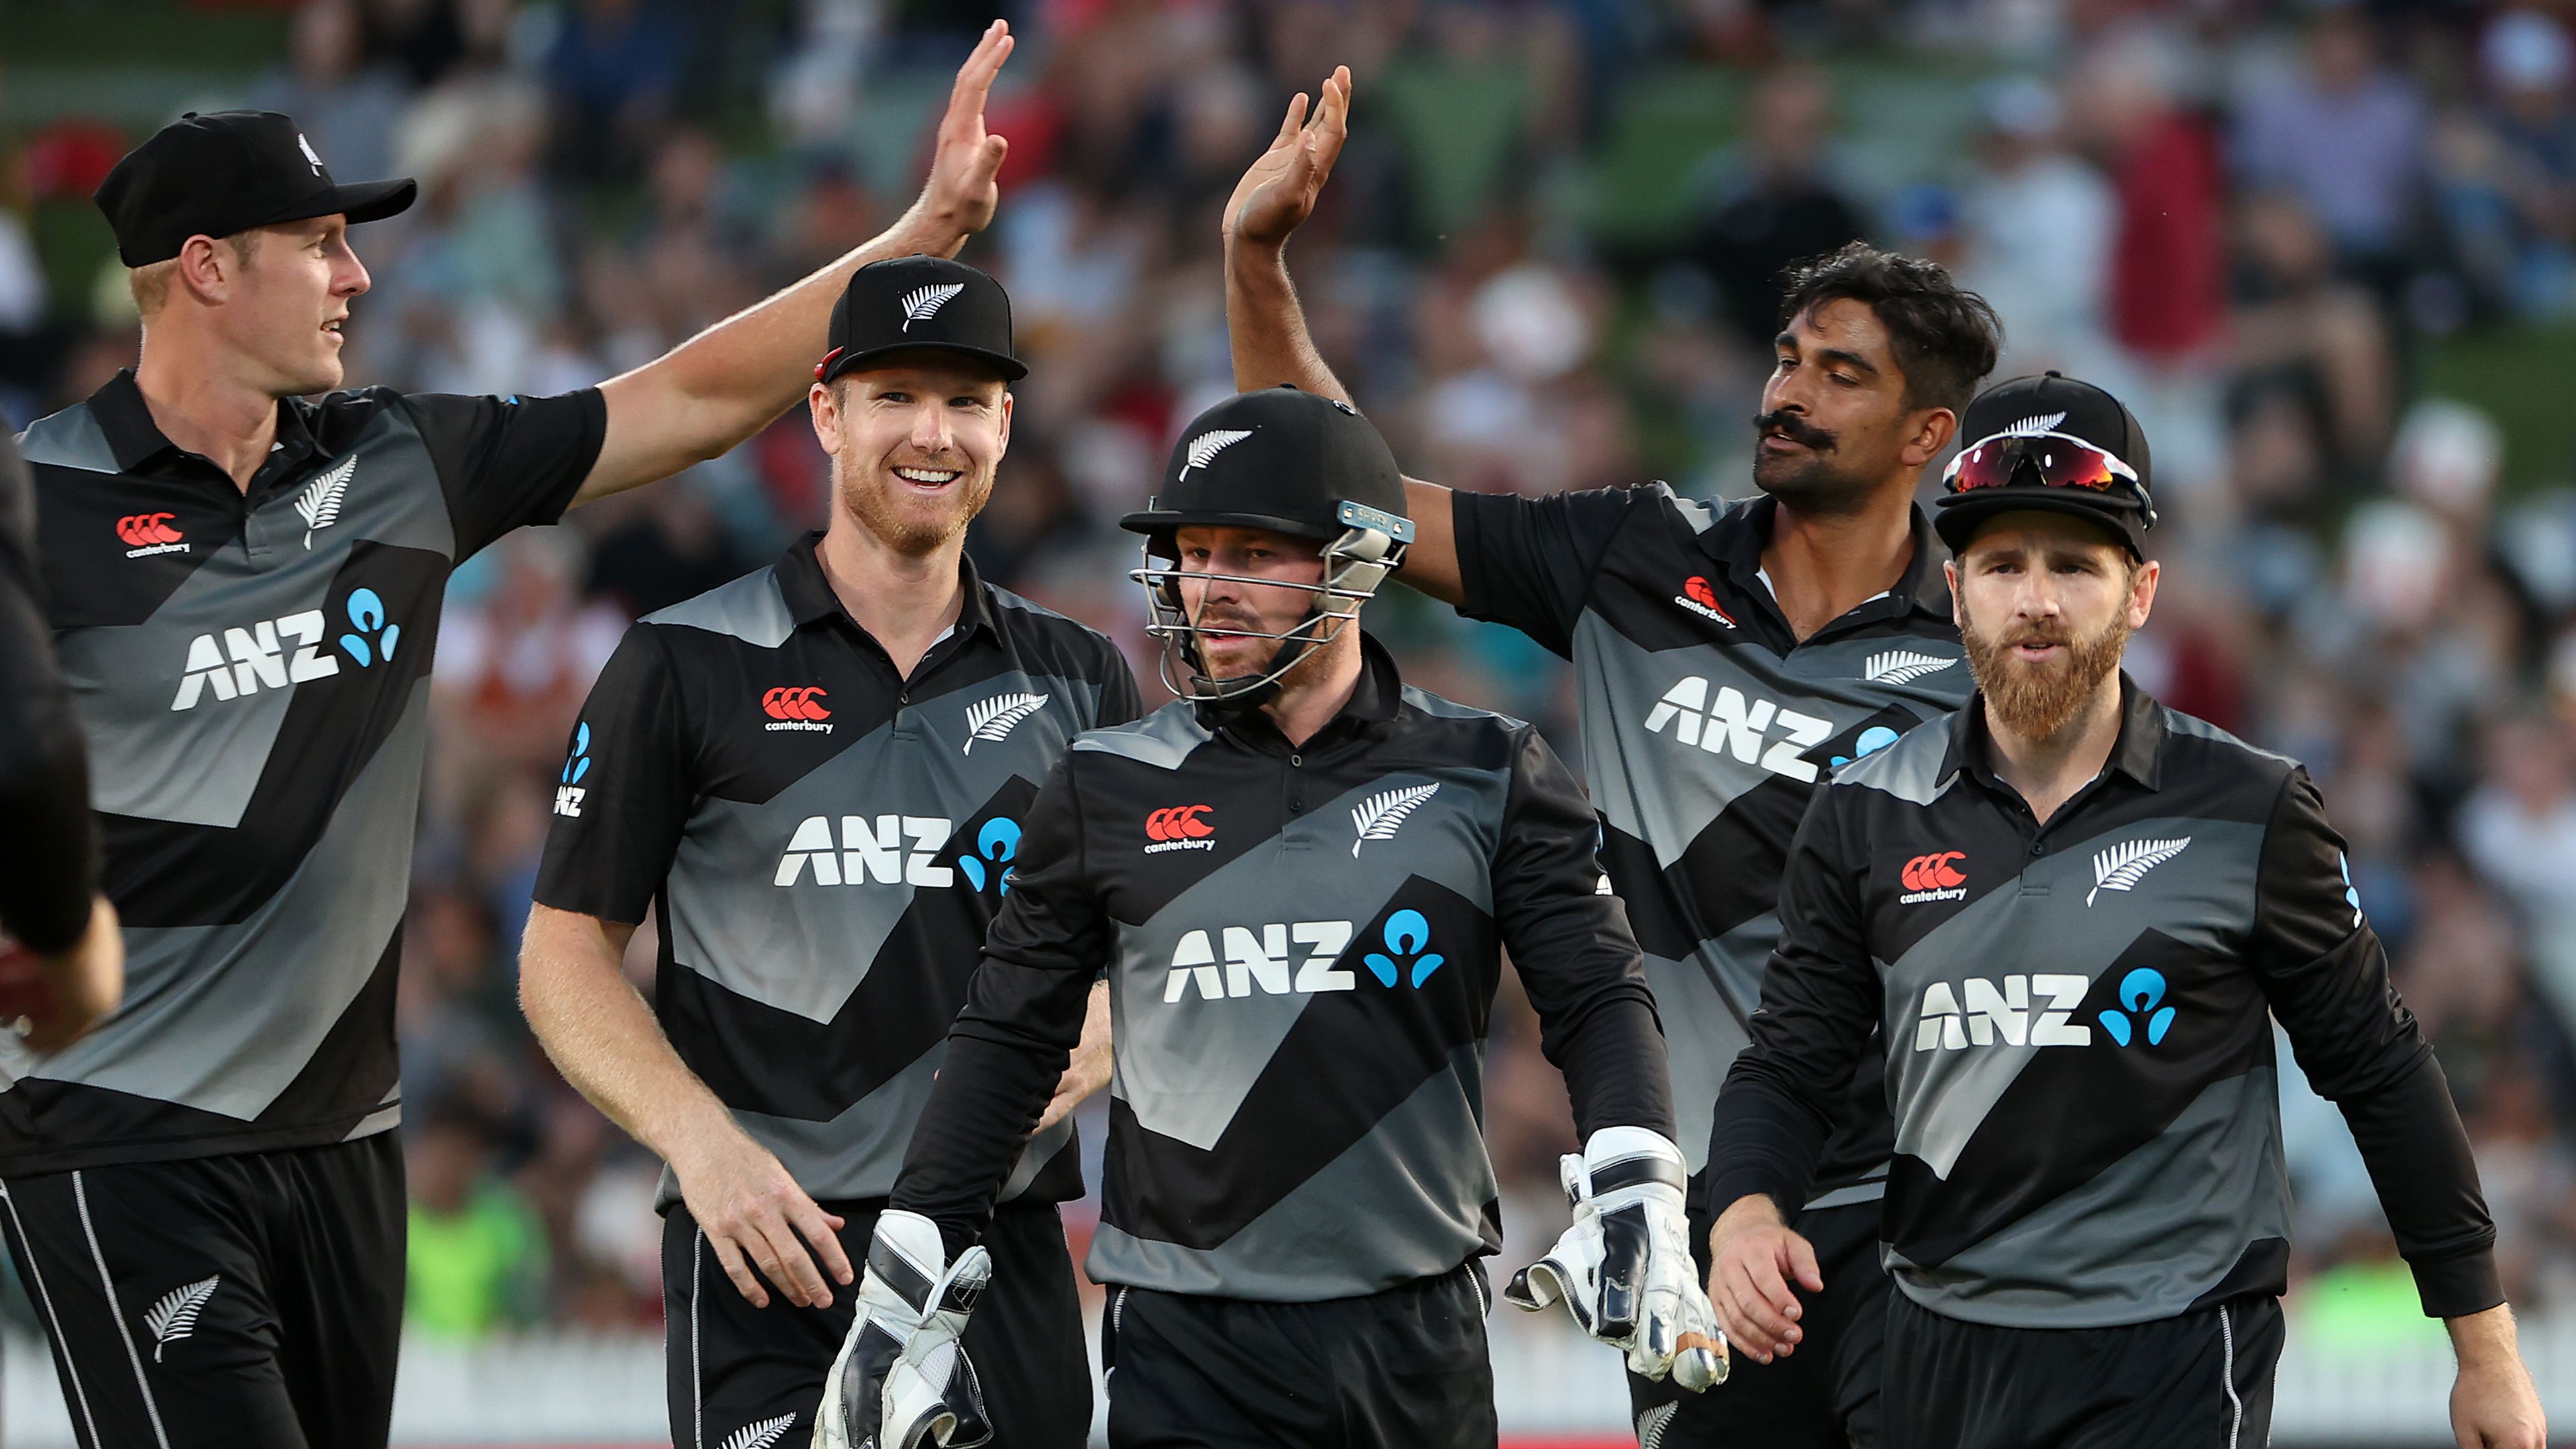 New Zealand crush Pakistan by nine wickets to take an unassailable 2-0 lead in the T20 series